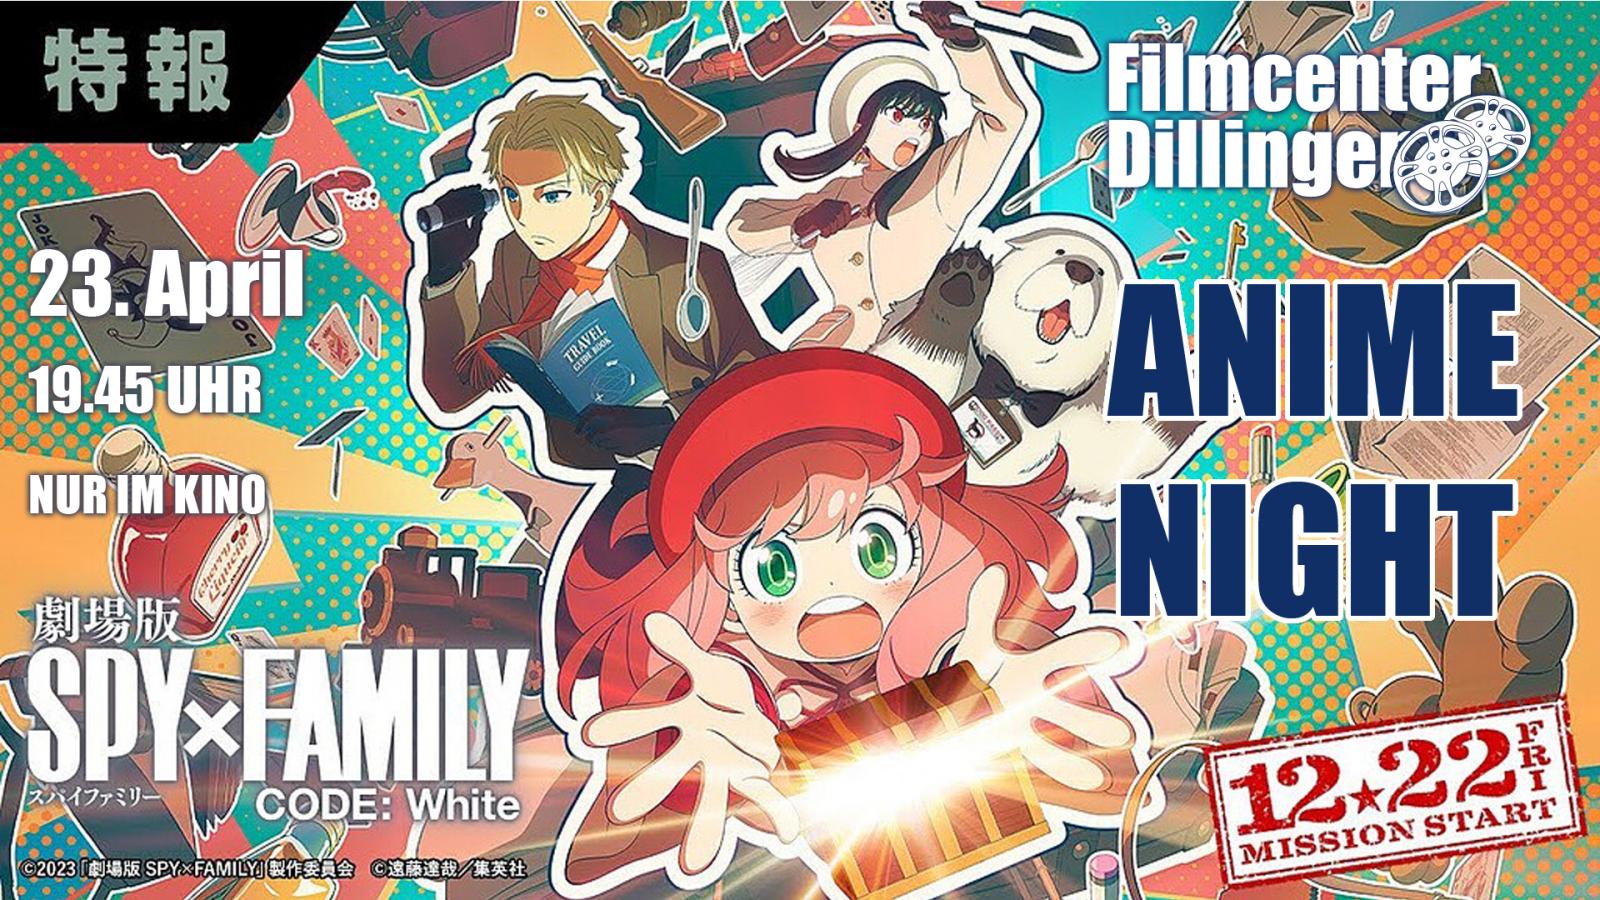 ANIME NIGHT Rascal does not dream DOUBLE FEATURE